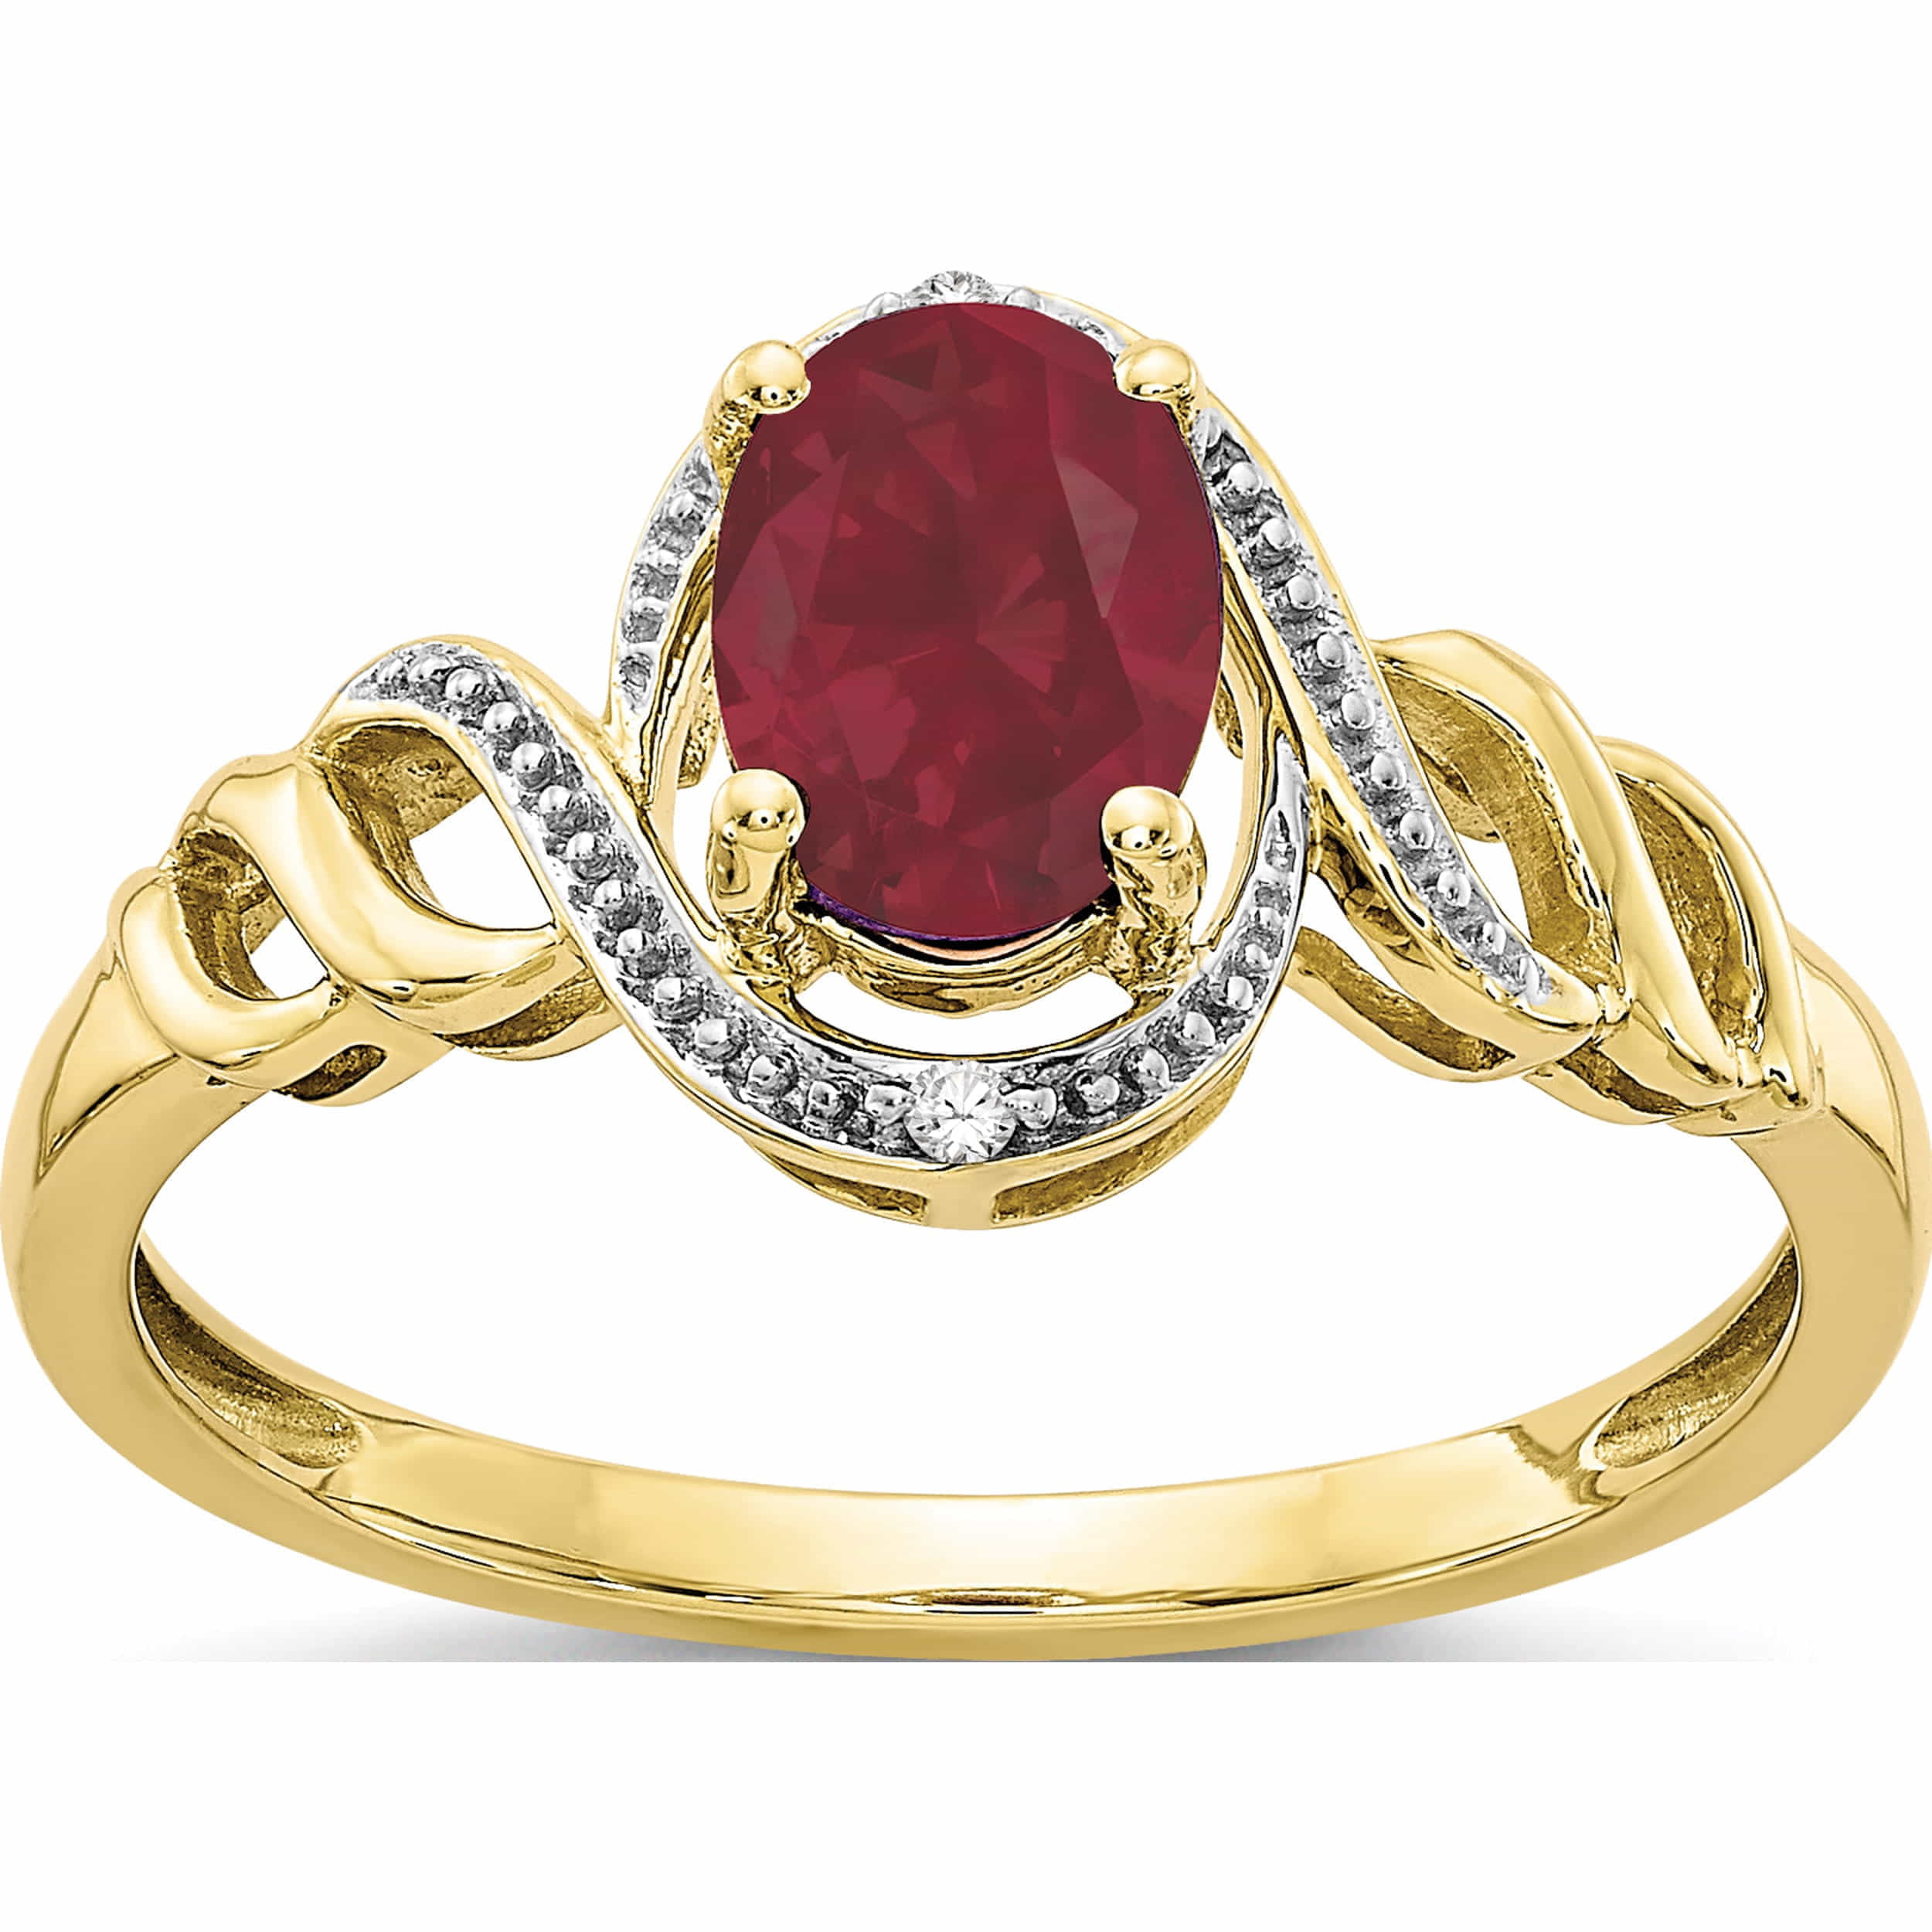 Solitaire 4Ct Emerald Cut Natural Red Ruby 14k Yellow Gold Women's Wedding  Ring | eBay